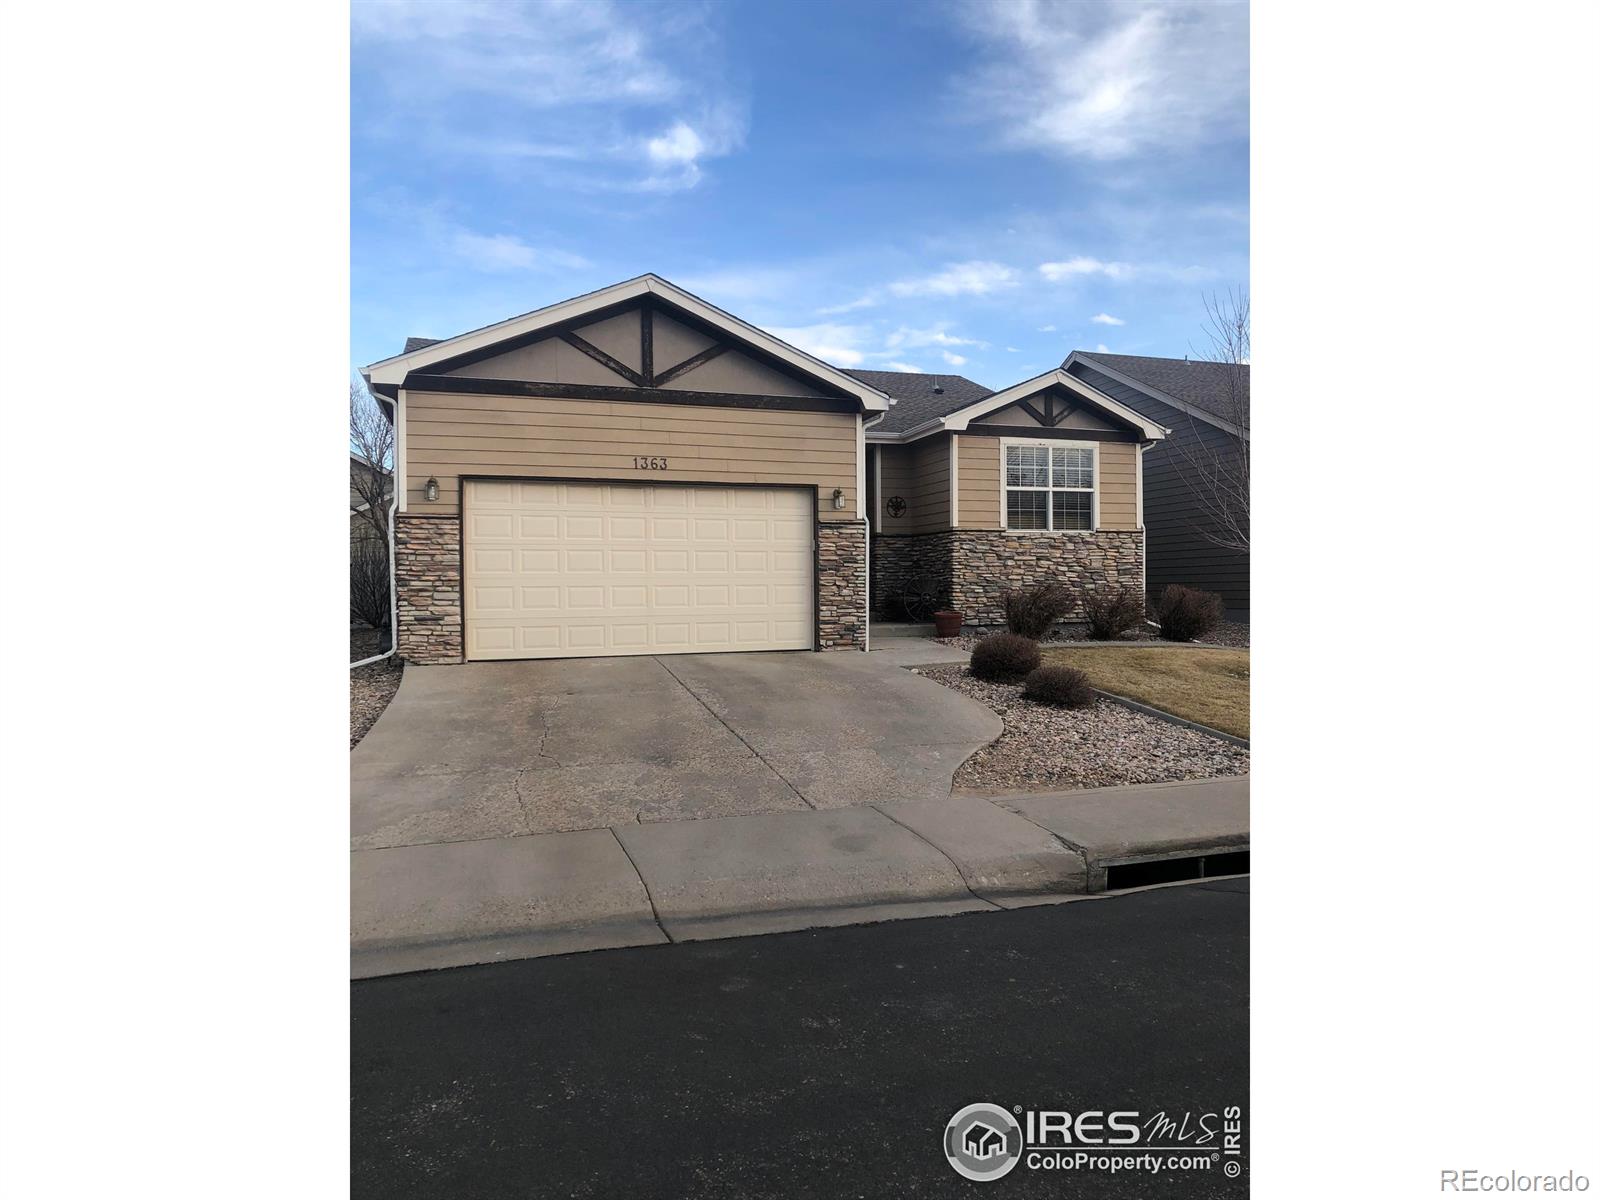 Report Image for 1363  Sunset Bay Drive,Windsor, Colorado